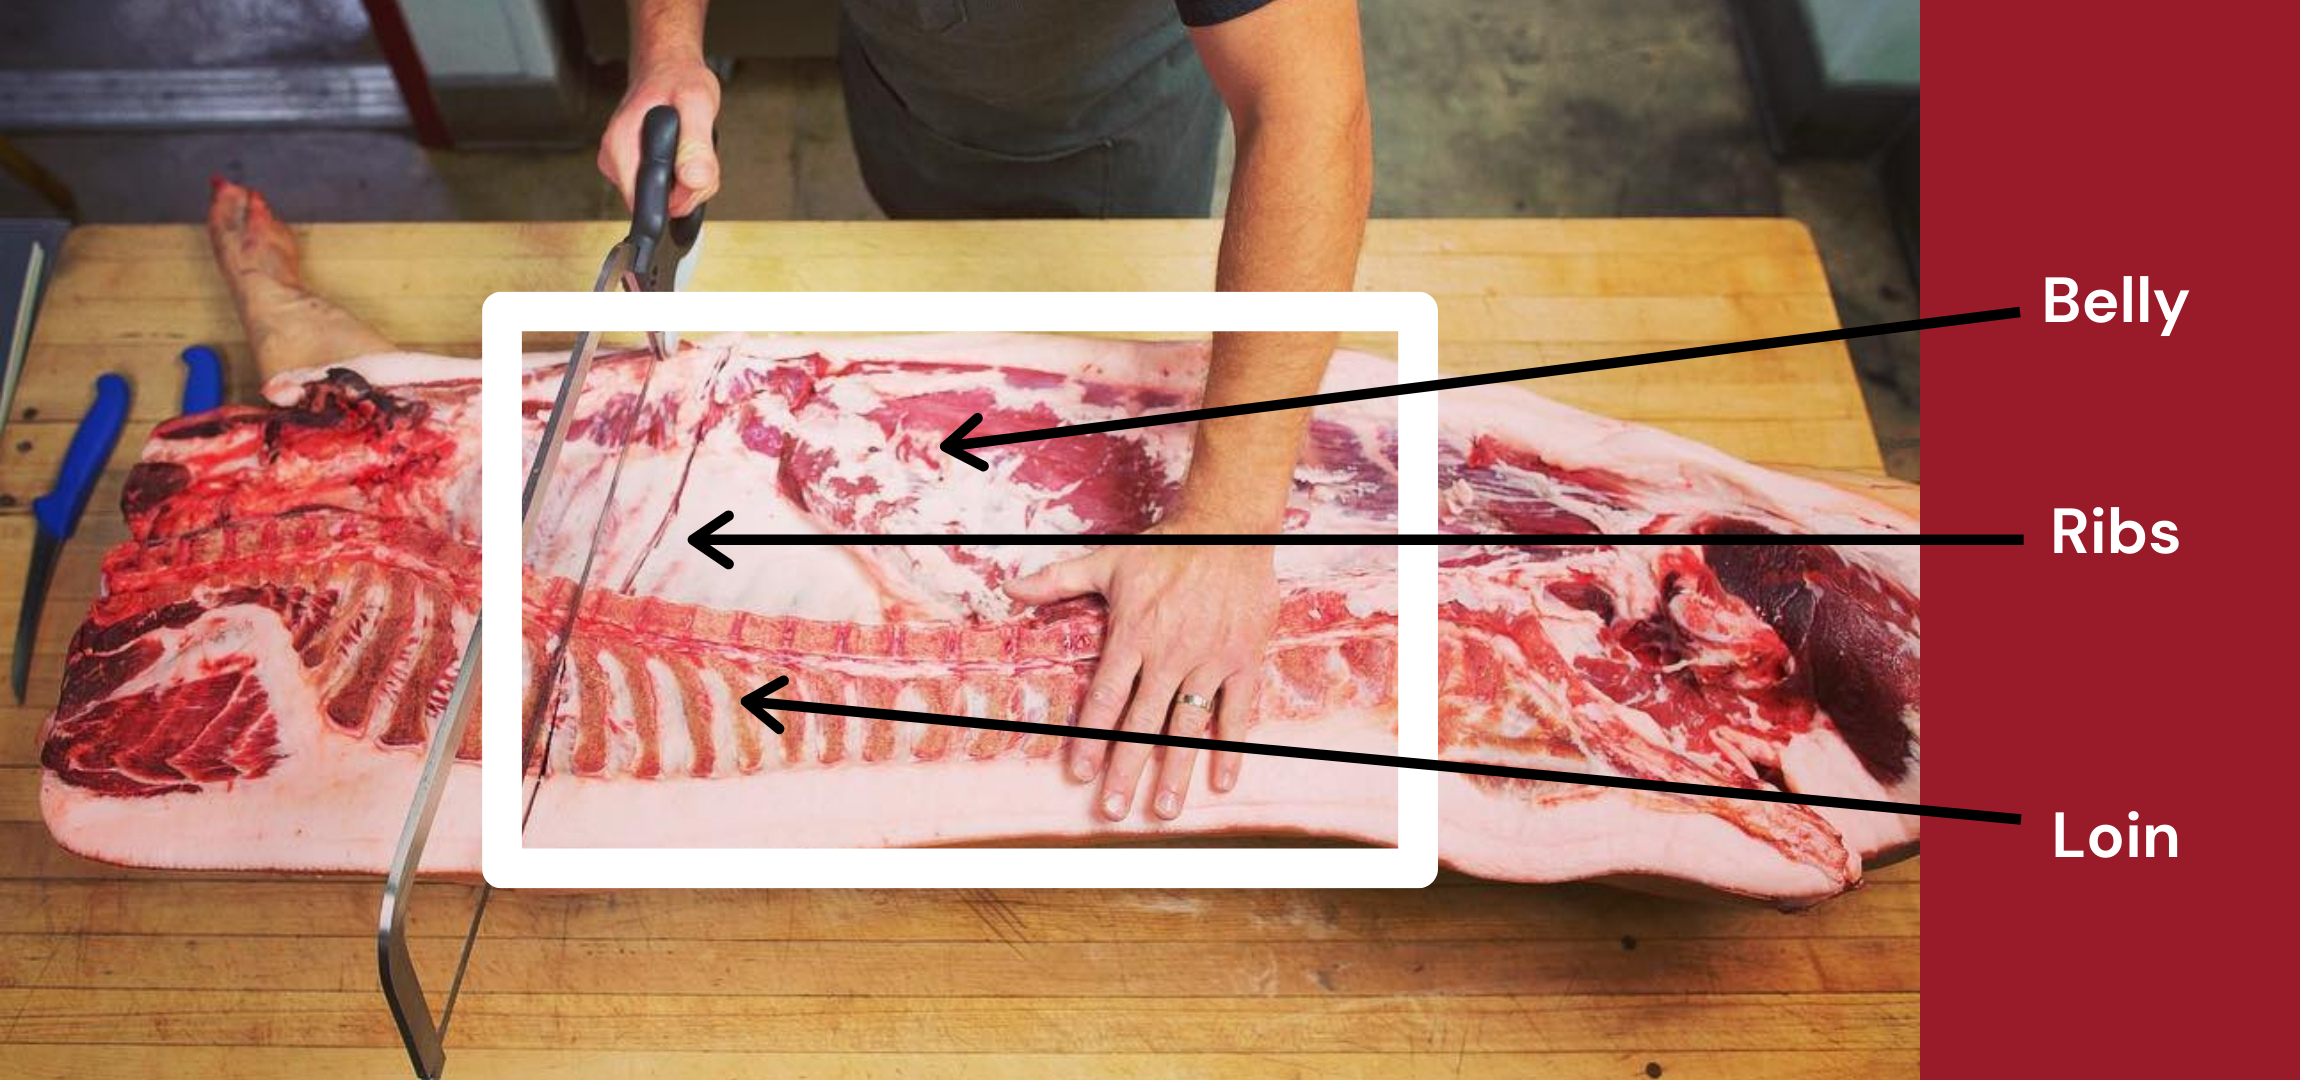 An image that shows a picture of a half pig on a table being processed by a butcher with arrows pointing out the pigs loin, ribs and belly.